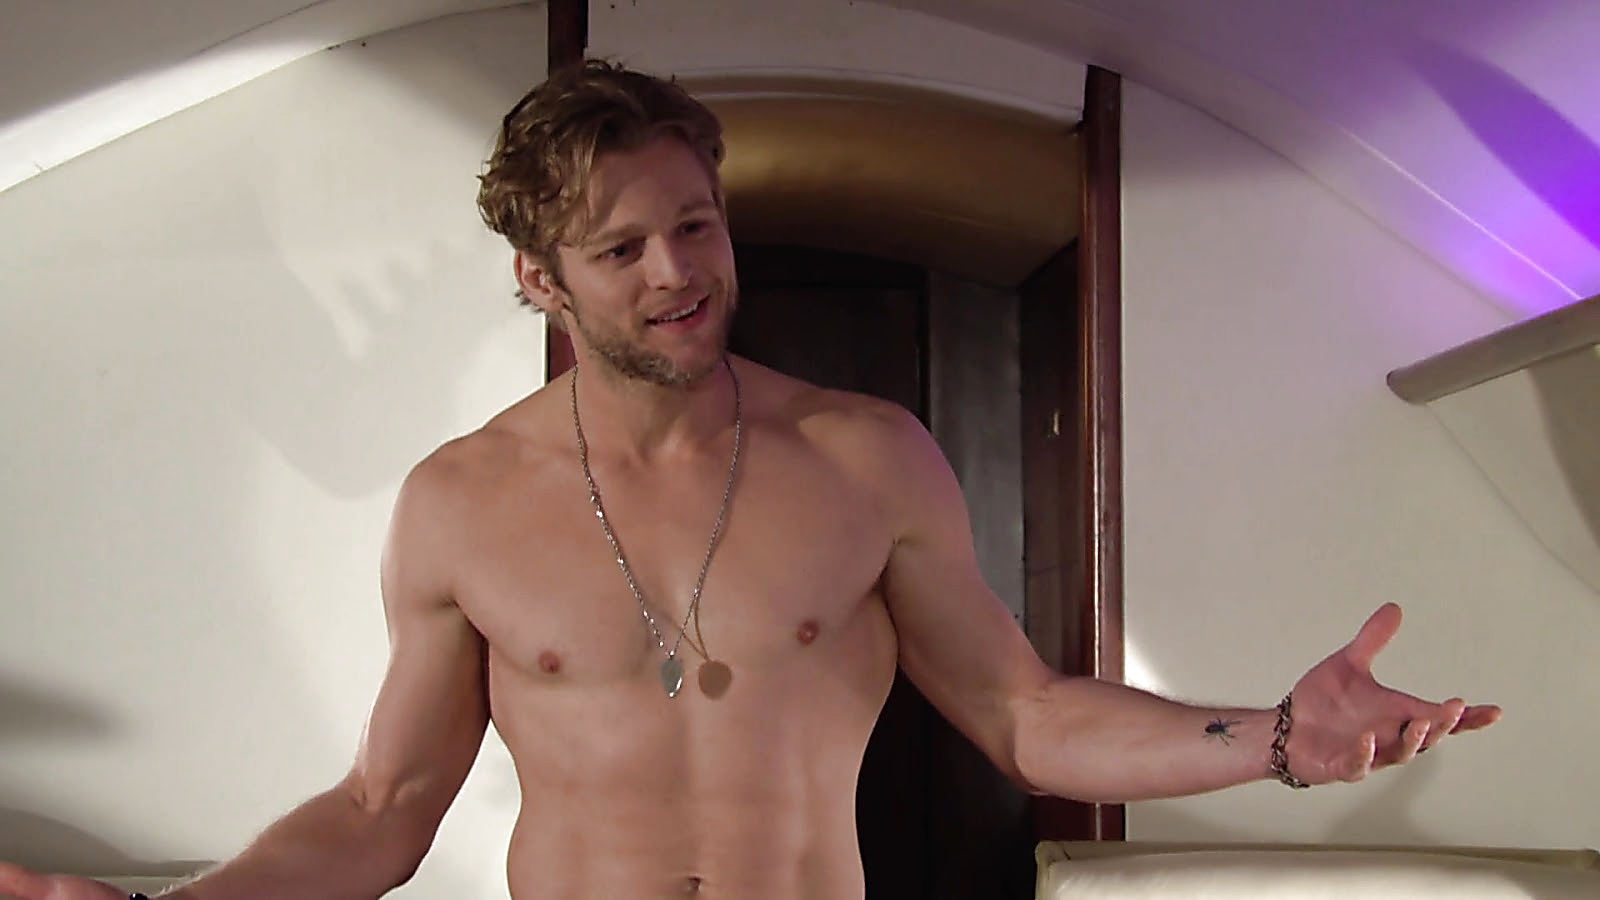 chase coleman actor shirtless